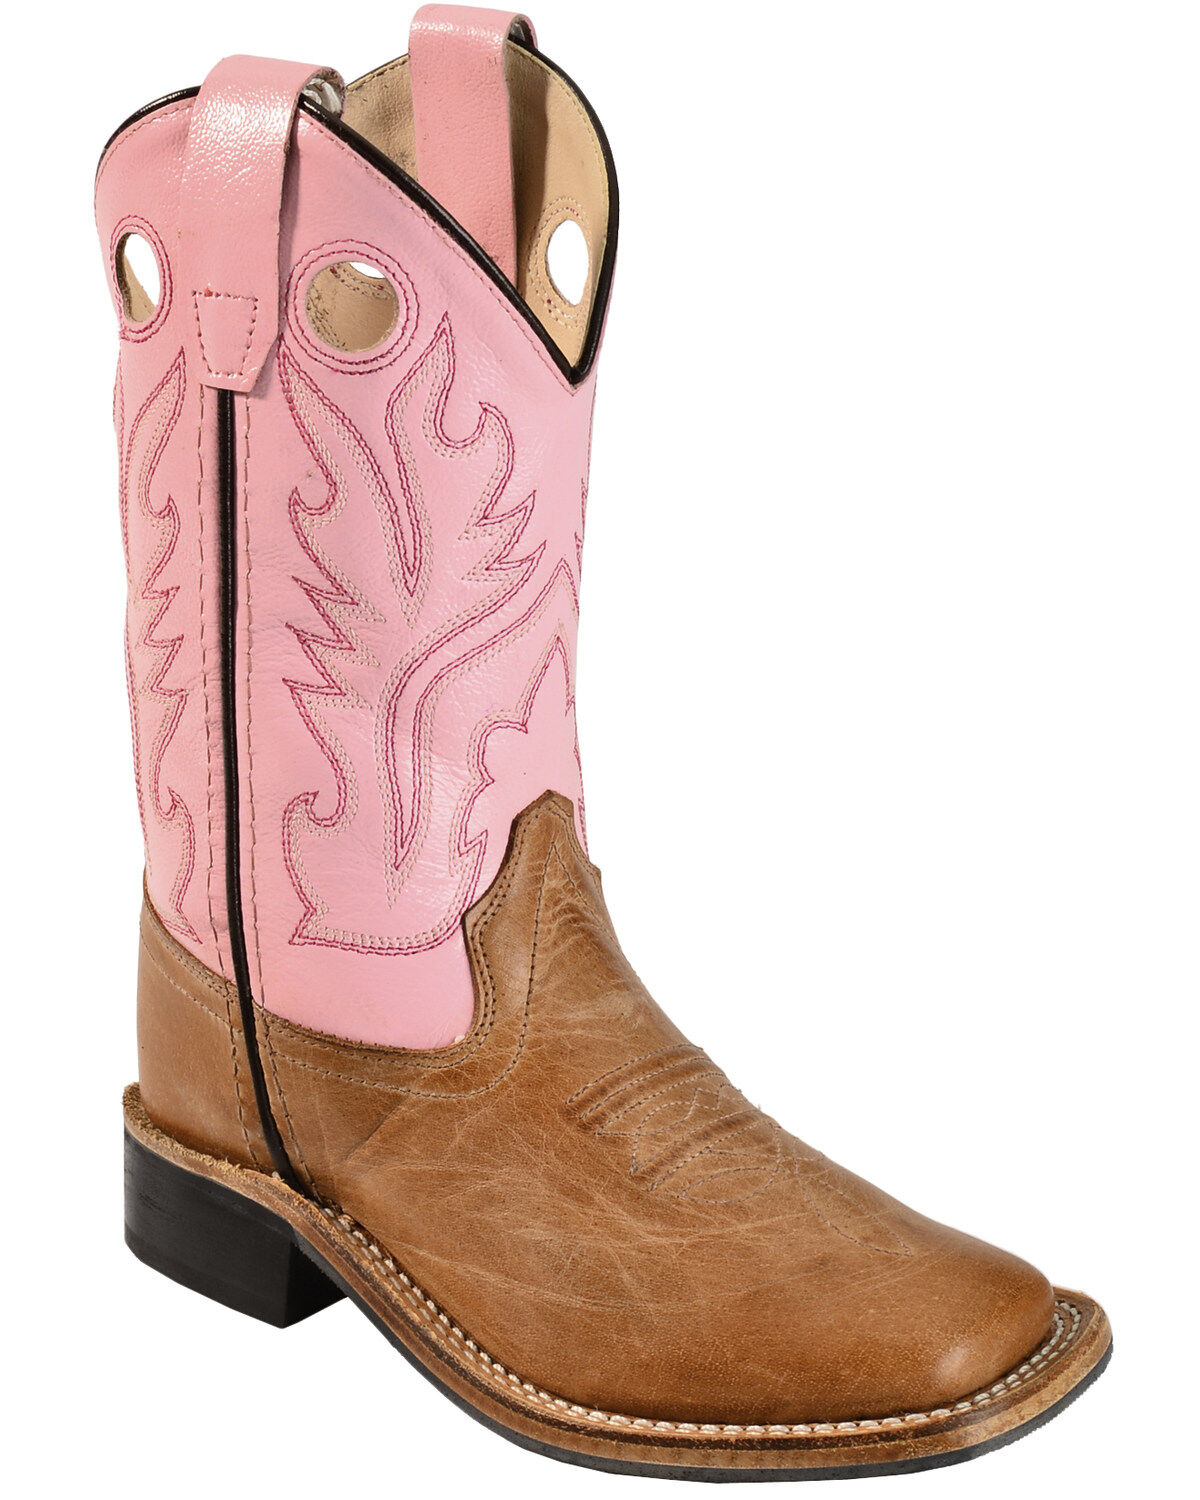 childrens pink cowgirl boots